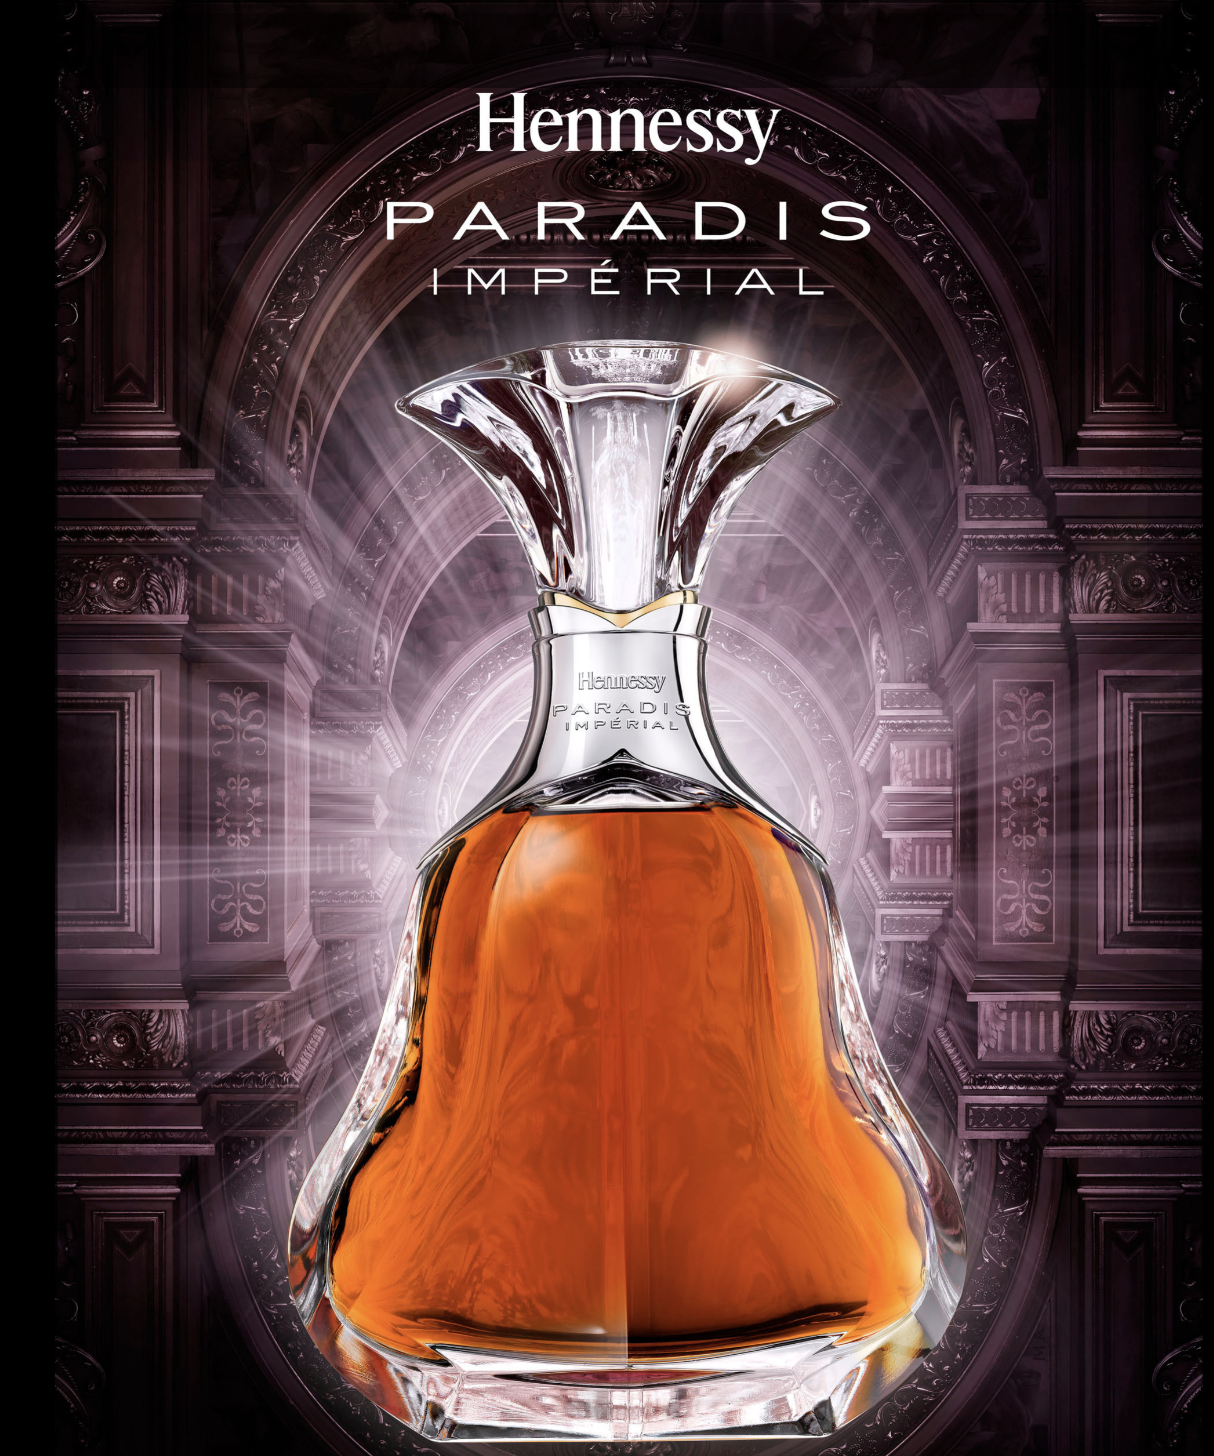 Hennessy Paradis Impérial: The Zenith of Cognac Craftsmanship